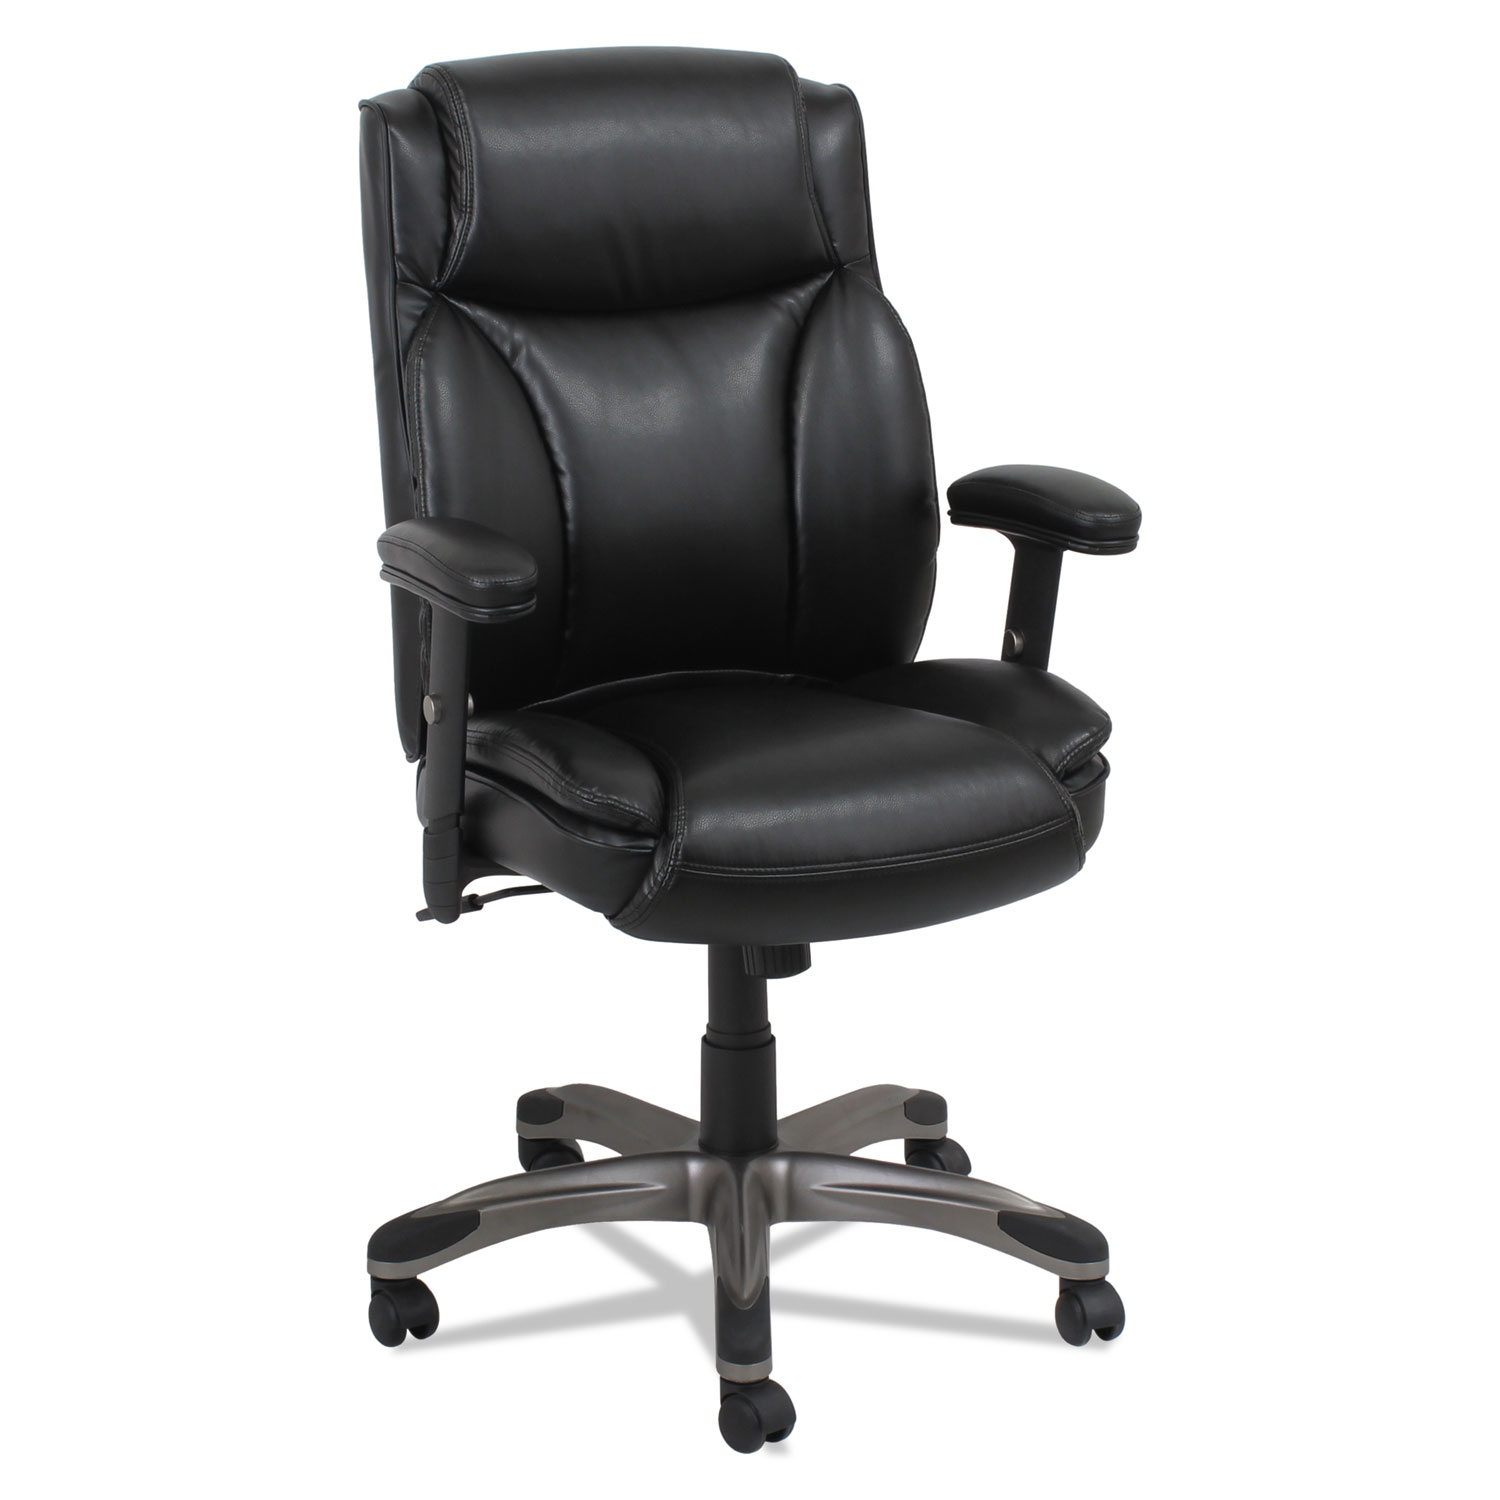  Alera ALEVN5119 Alera Veon Series Leather Mid-Back Manager's Chair, Supports up to 275 lbs., Black Seat/Black Back, Graphite Base (ALEVN5119) 